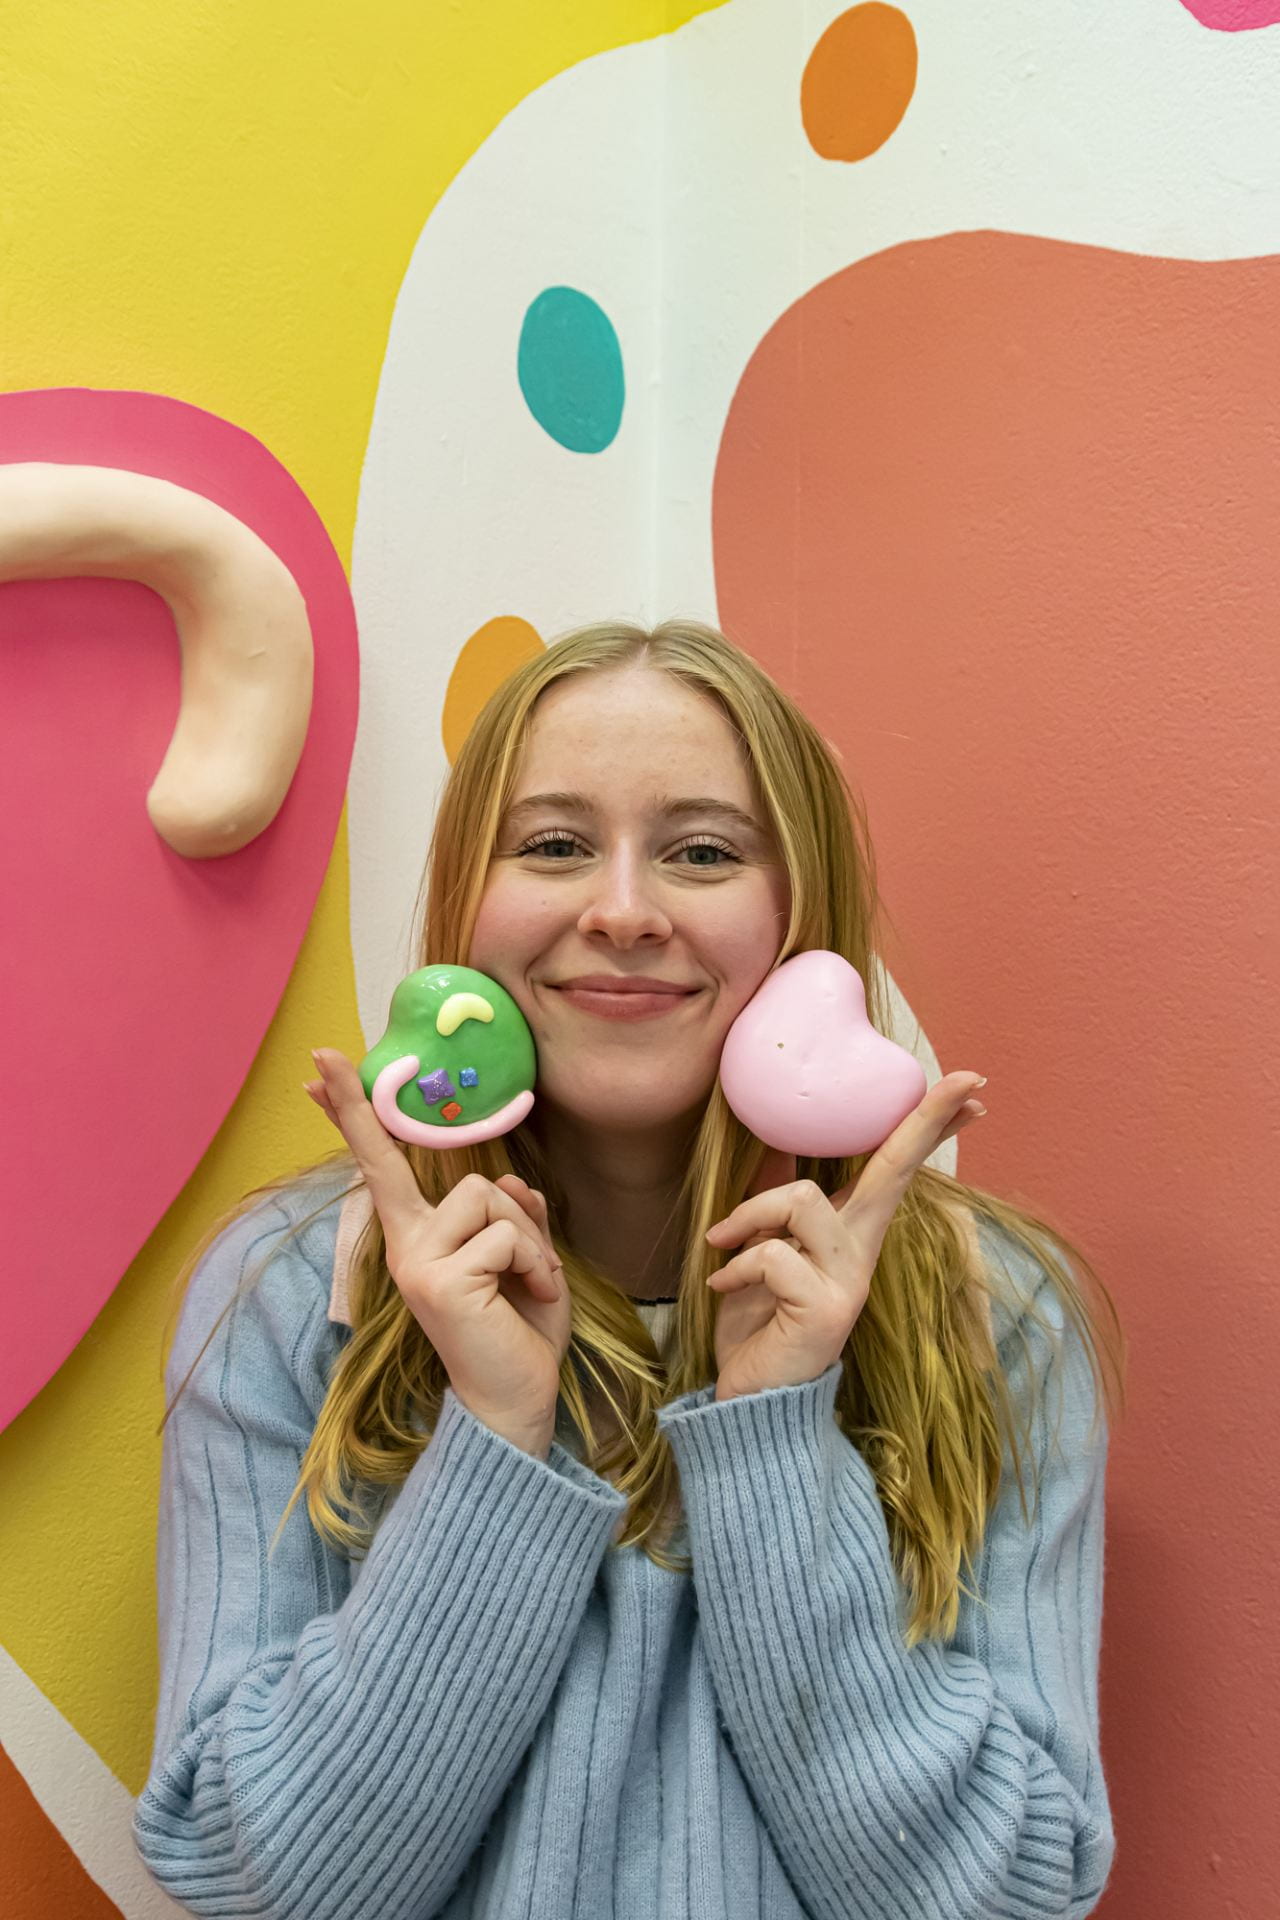 Artist posing with two small heart sculptures near face, with mural behind.